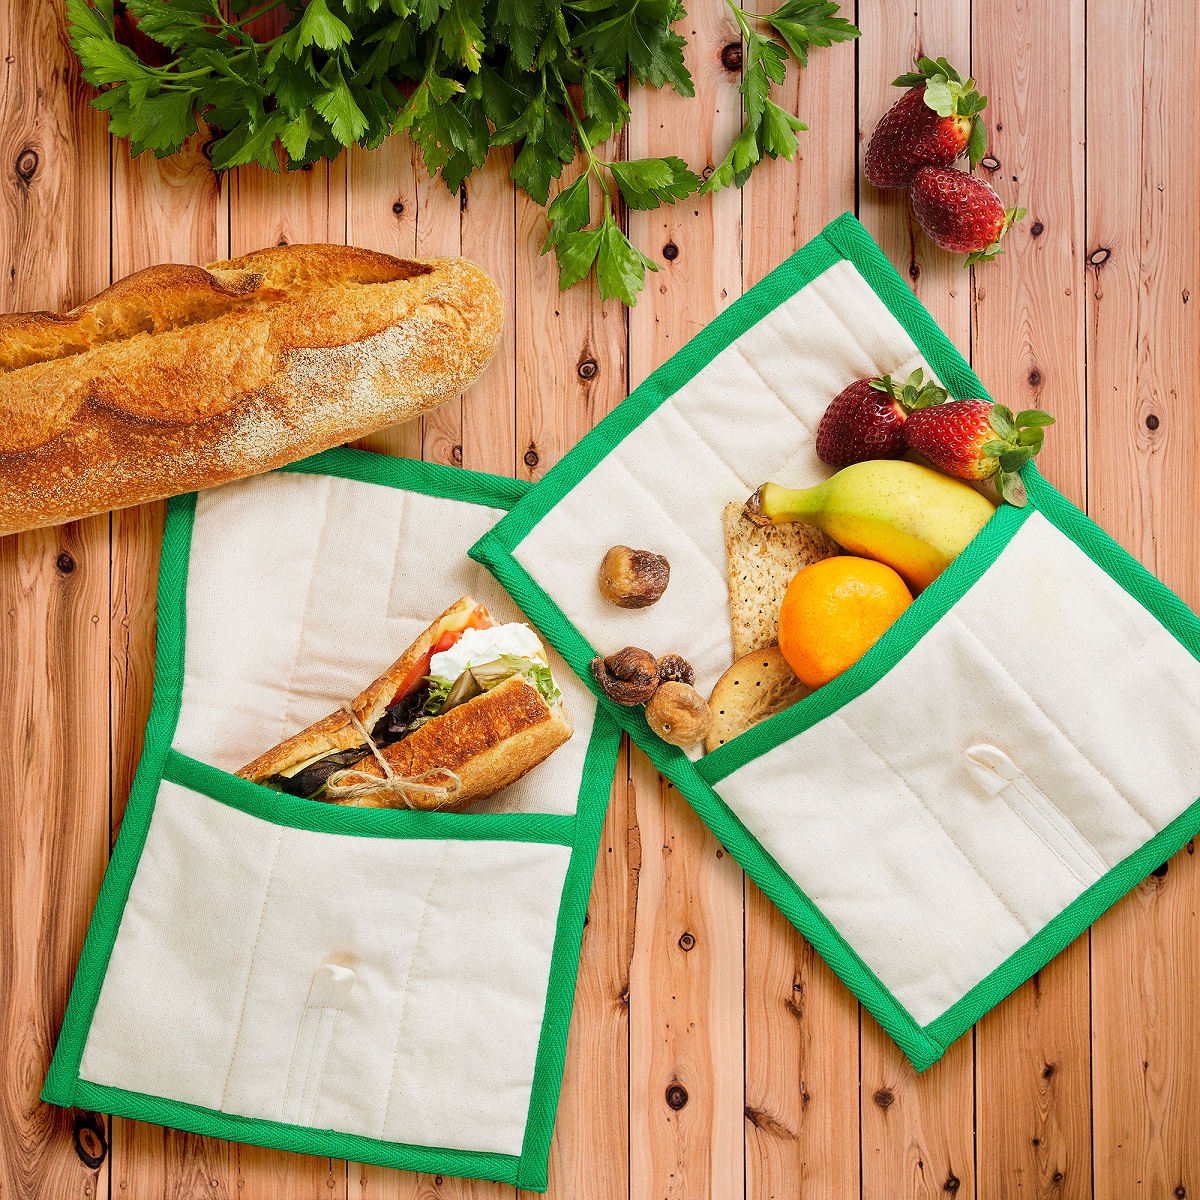 reusable lunch bag - no need to wrap your food in plastic anymore!